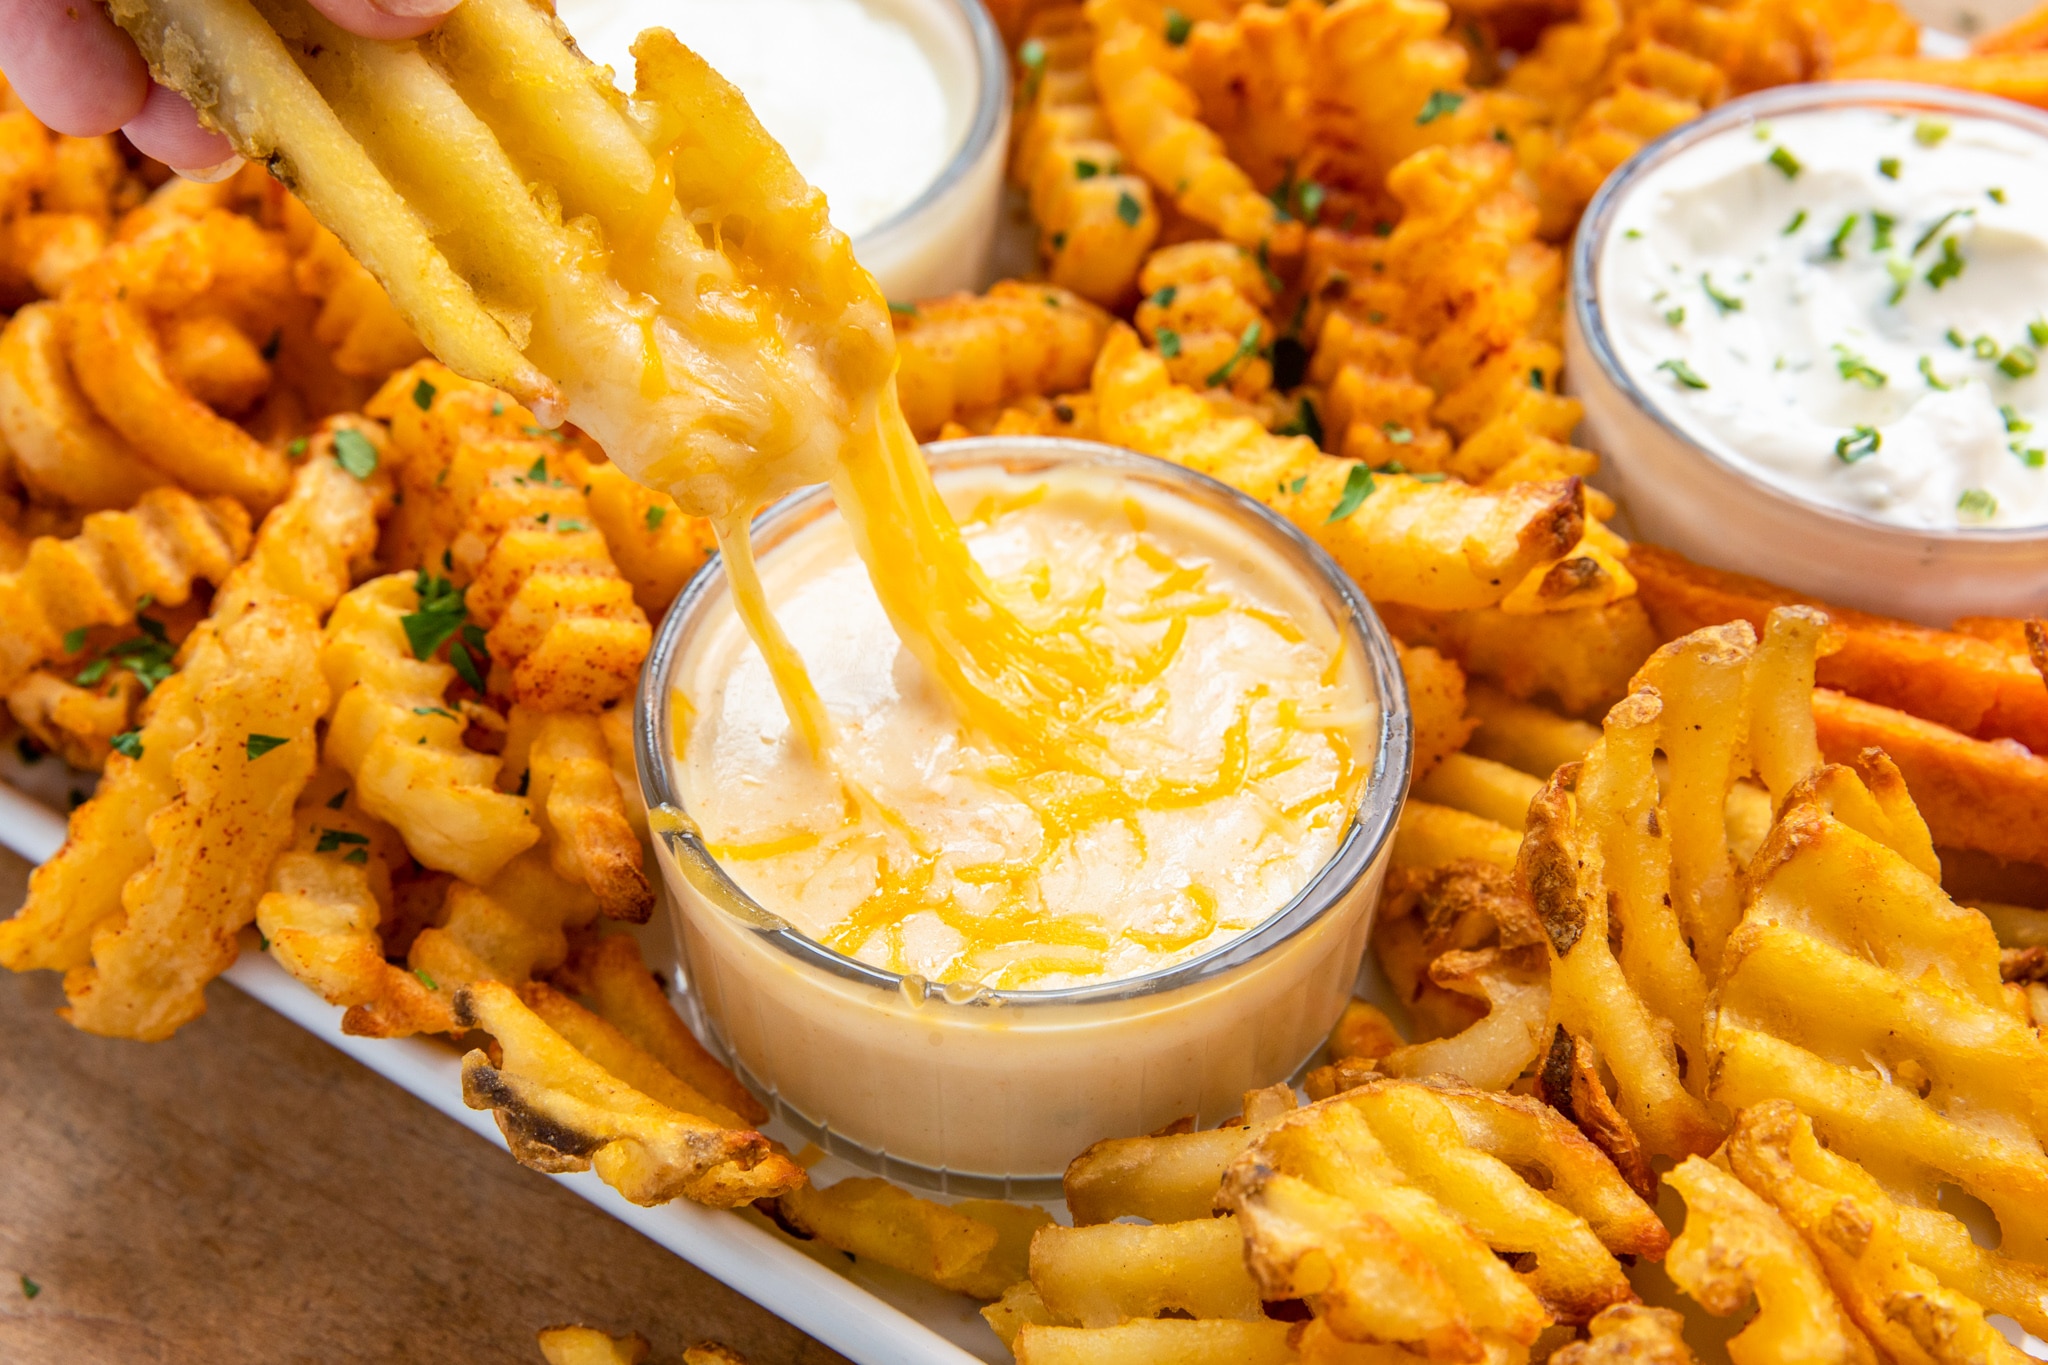 A finger dipping a waffle fry in taco cheese dip, creating a perfect combination of flavors.